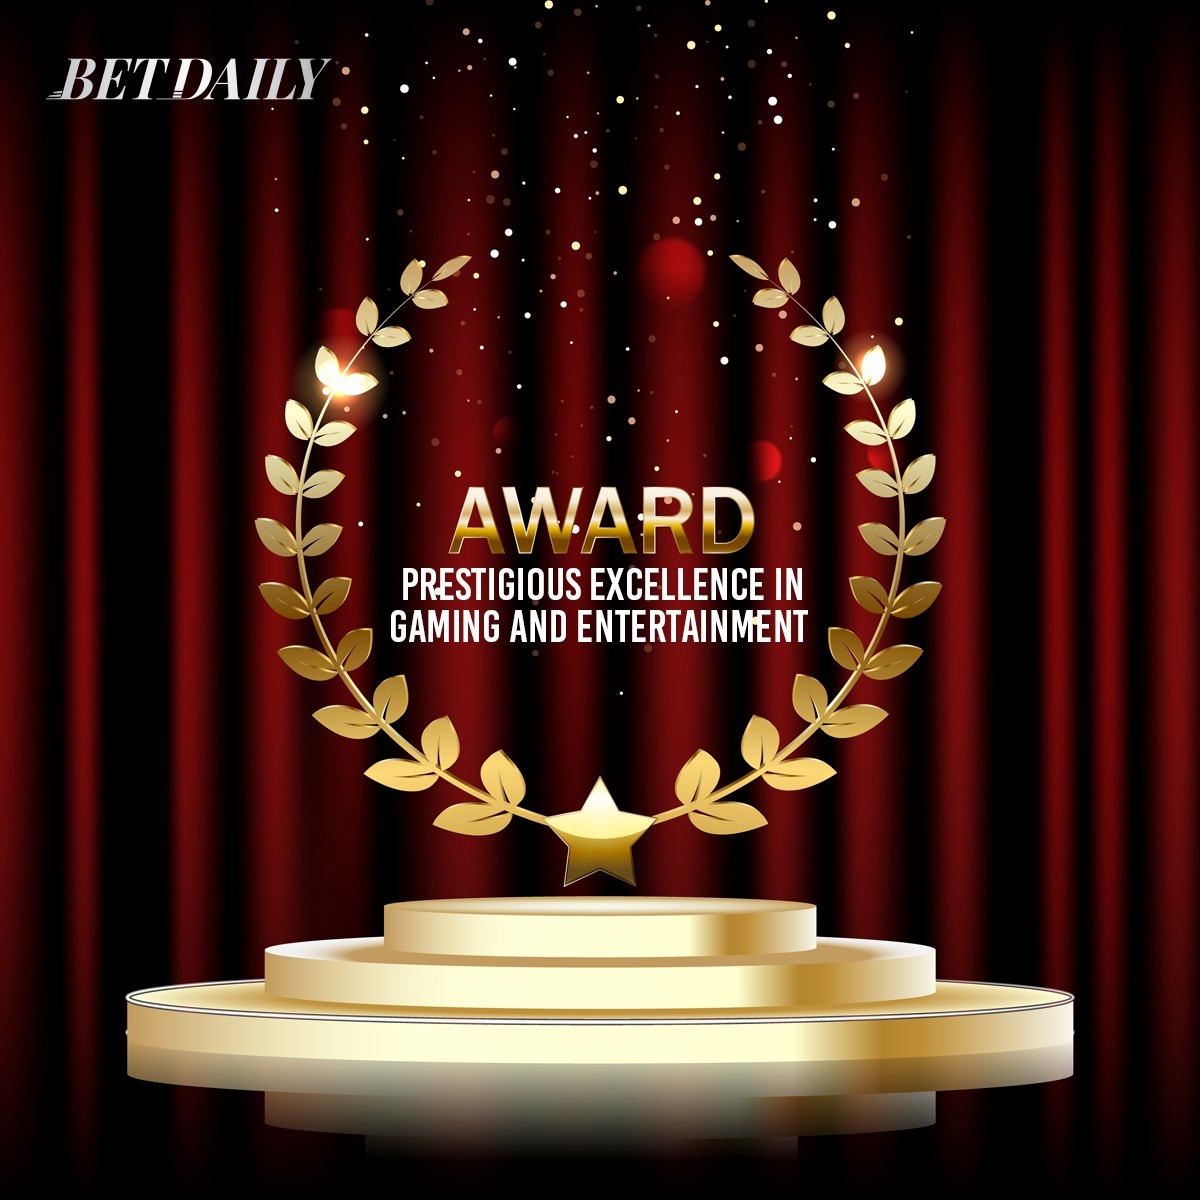 BetDaily awarded with Prestigious Excellence in Gaming and Entertainment Award